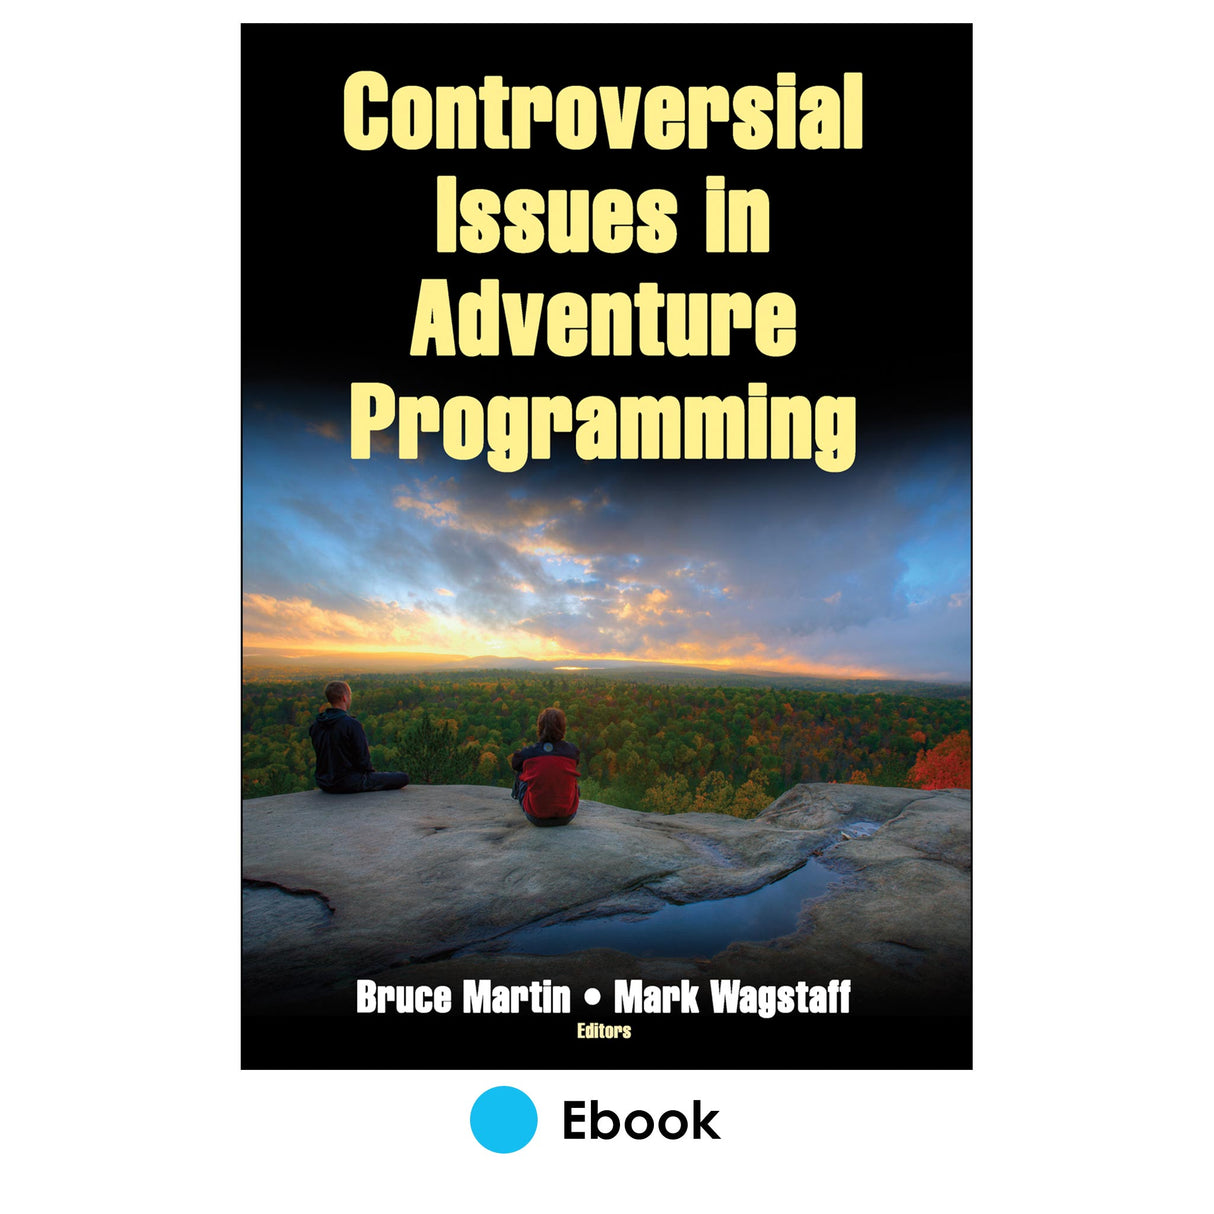 Controversial Issues in Adventure Programming PDF